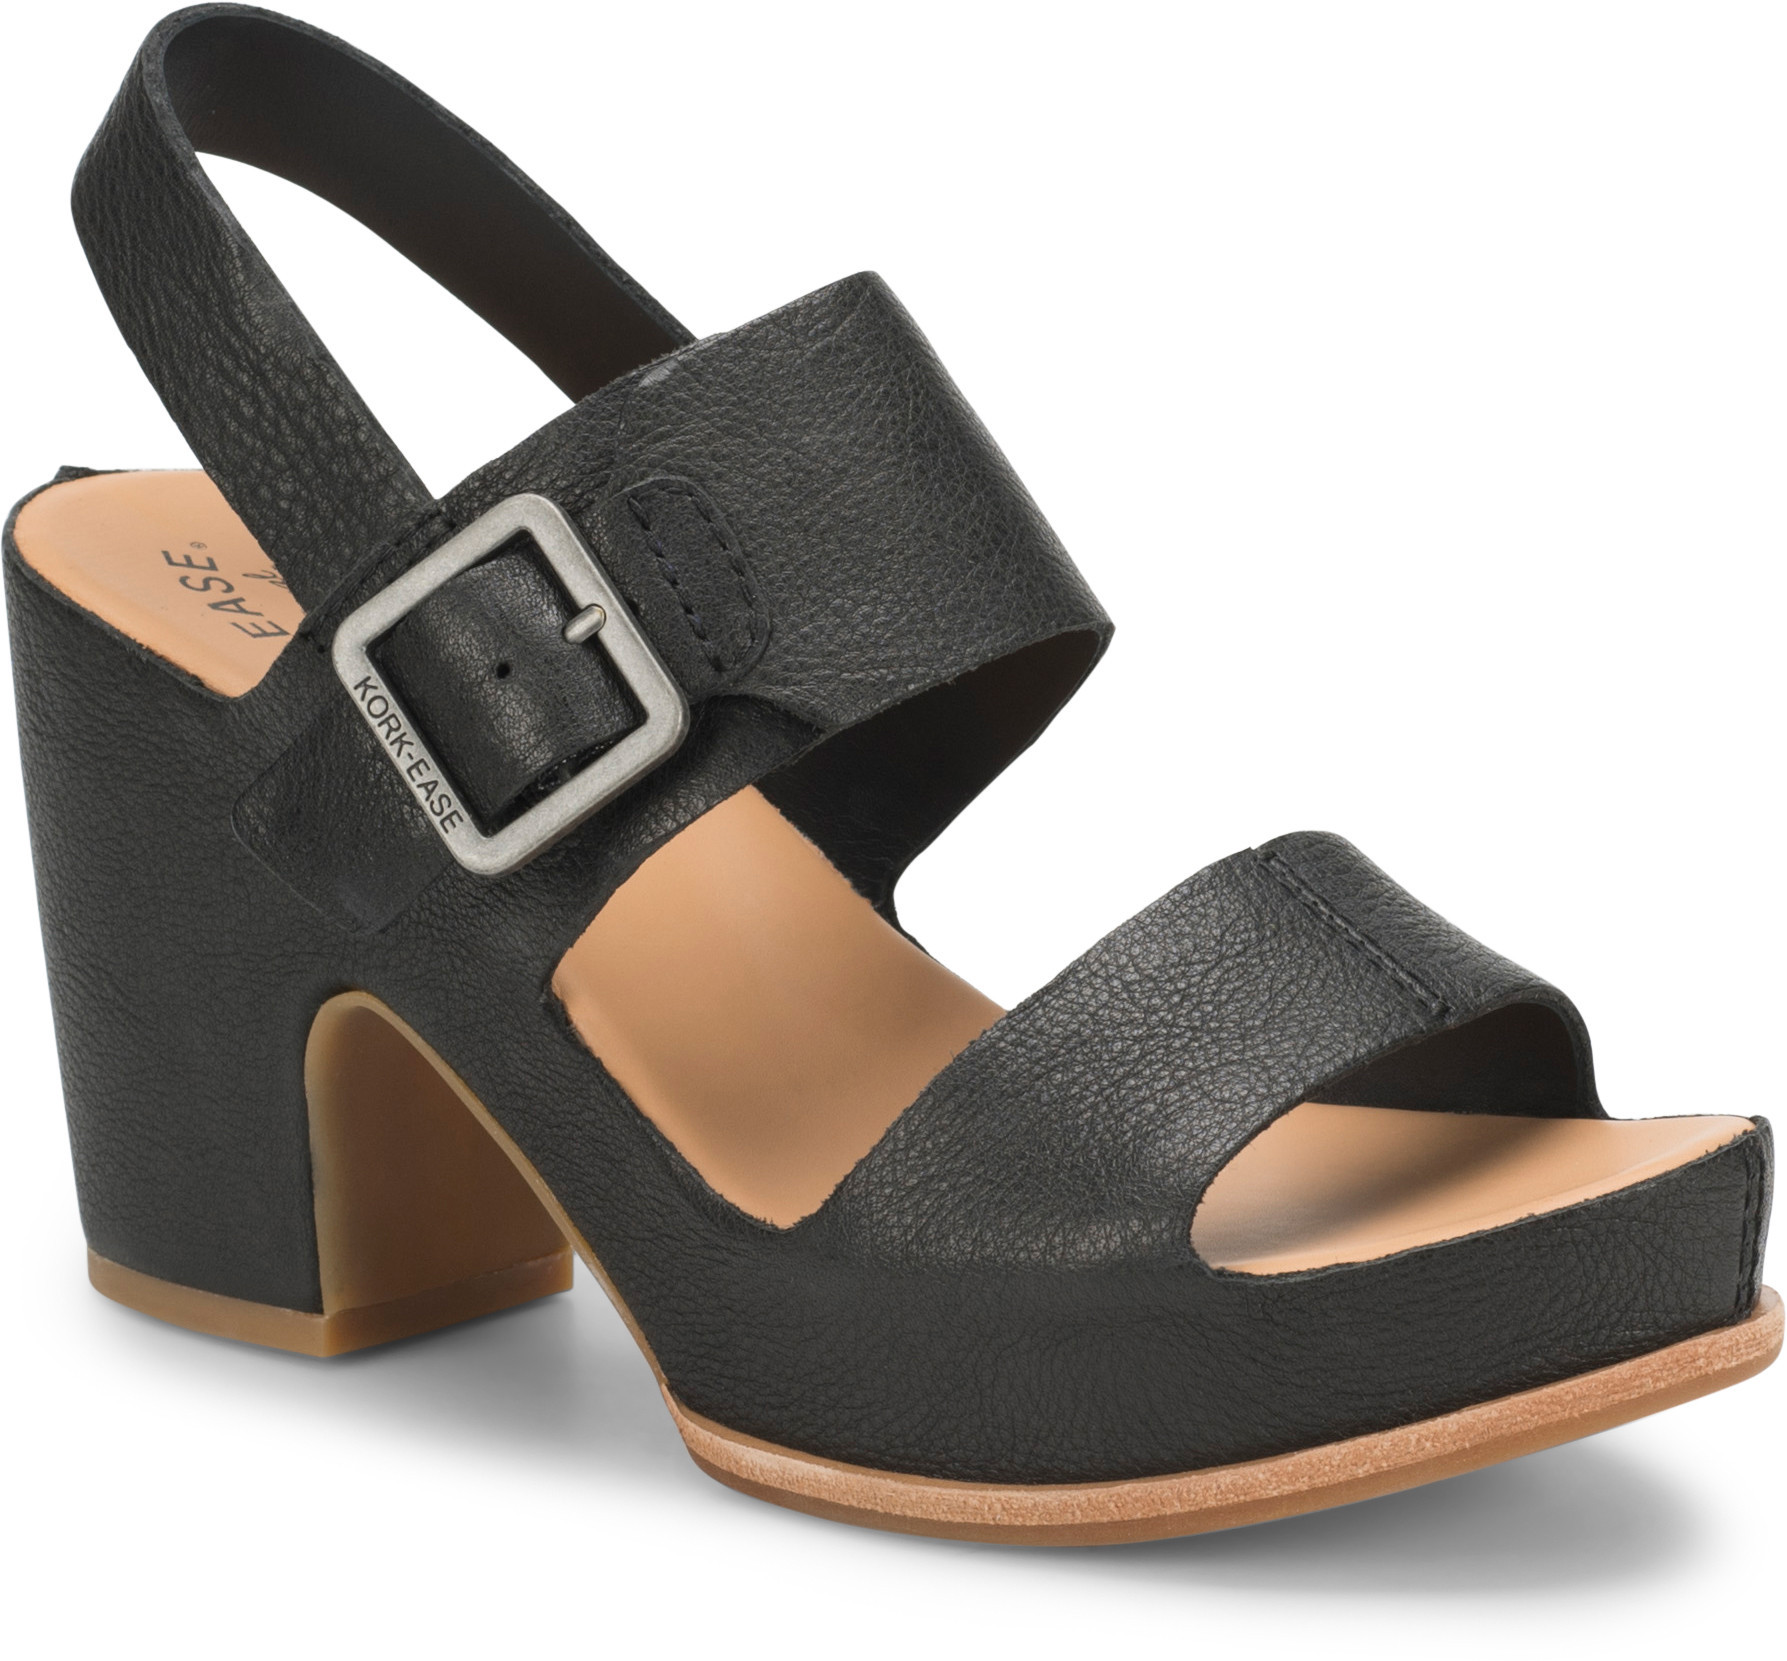 Women's Shoes | Sandals, Boots, Casuals & More | Kork-Ease